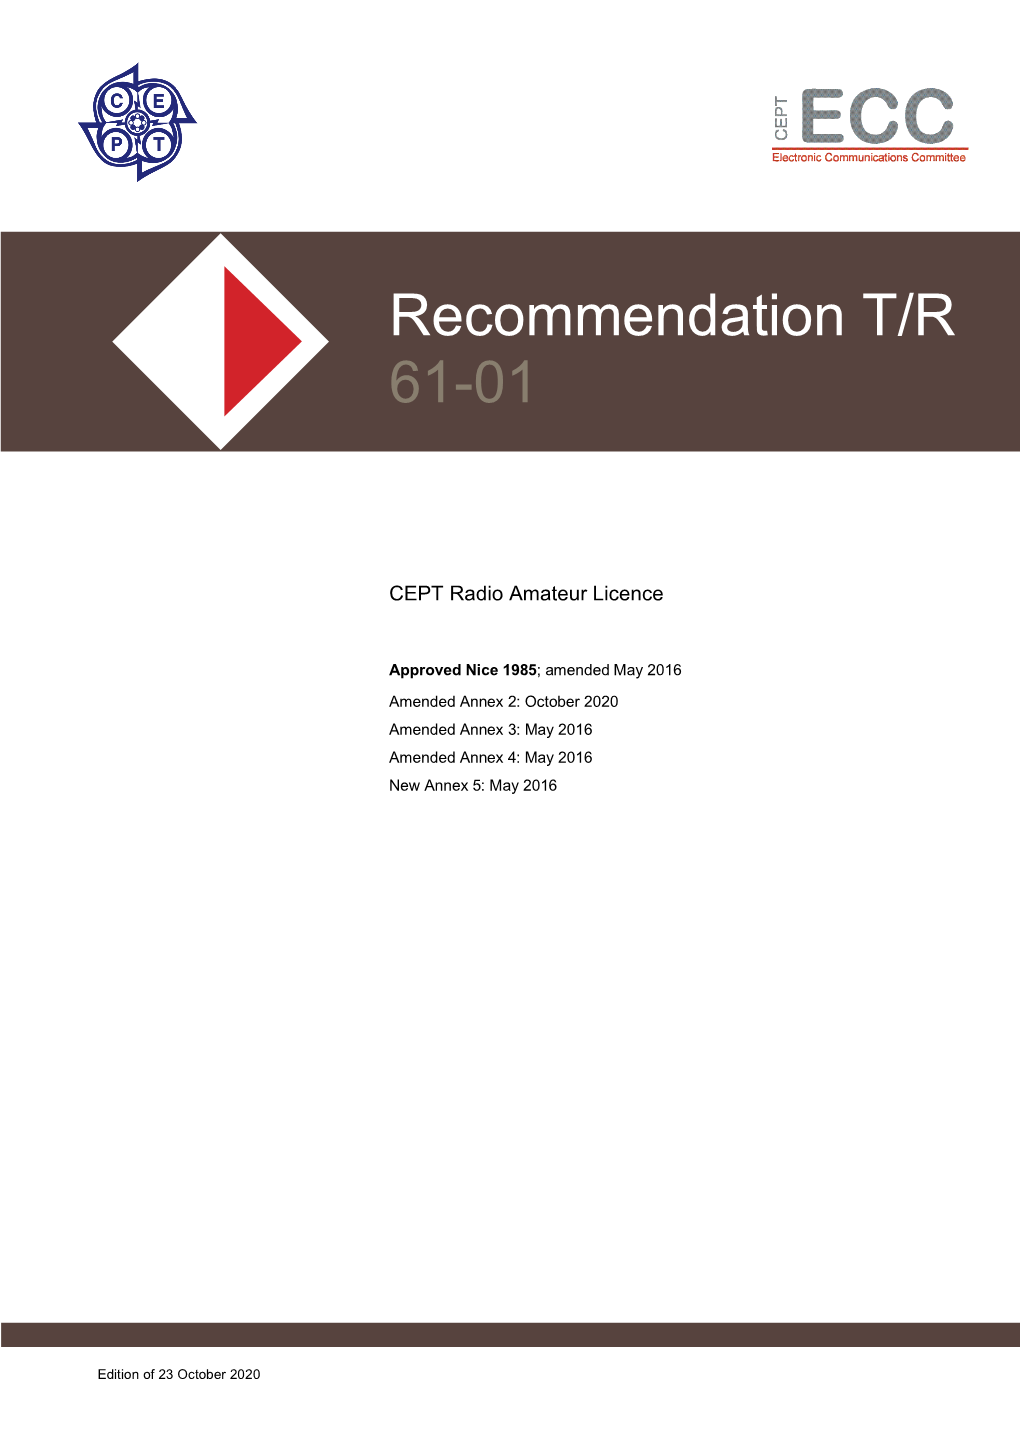 RECOMMENDATION T/R 61-01 – Page 2